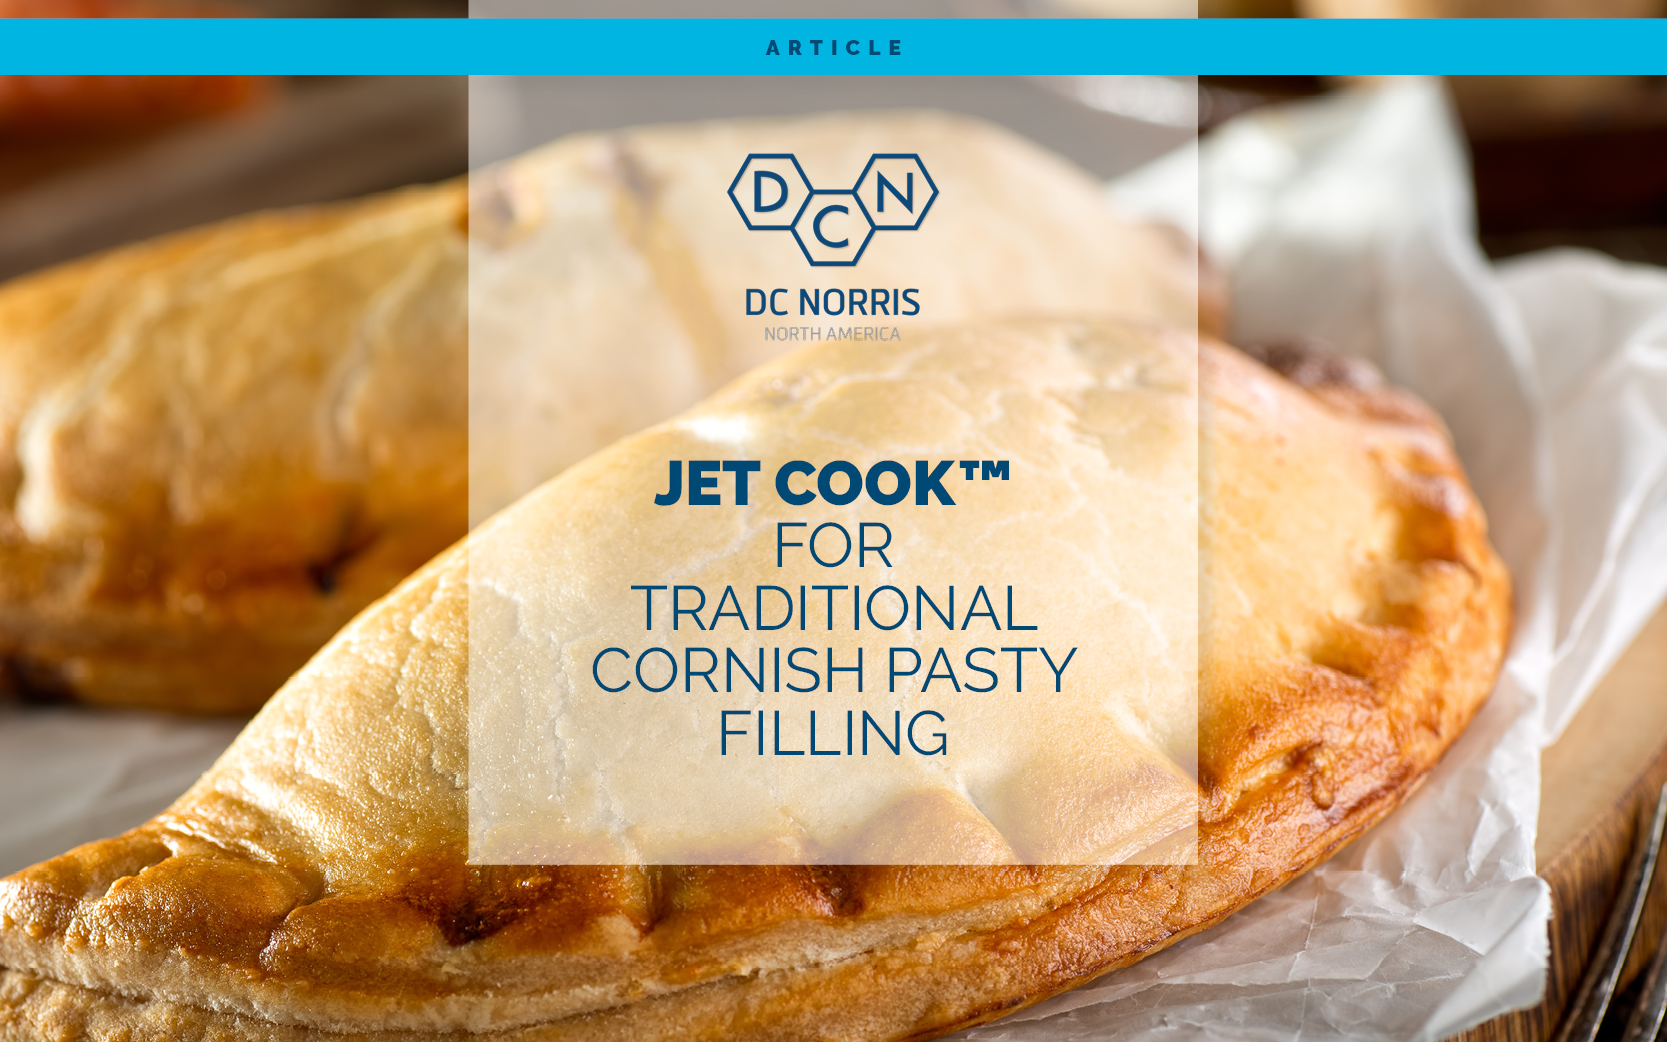 two cornish pasties behind a title that reads 'the jet cook system for traditional cornish pasty filling' beneath the DC Norris North America logo